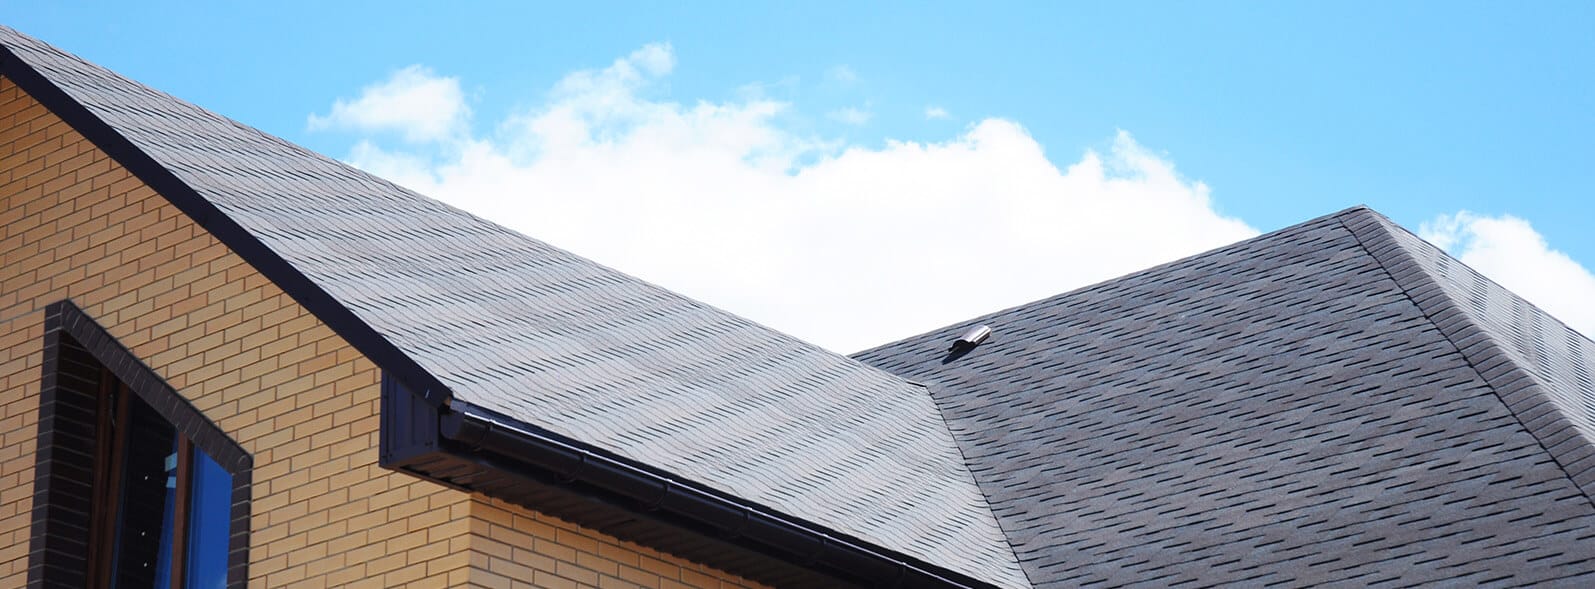 Diversified Roofing | Black tile roof